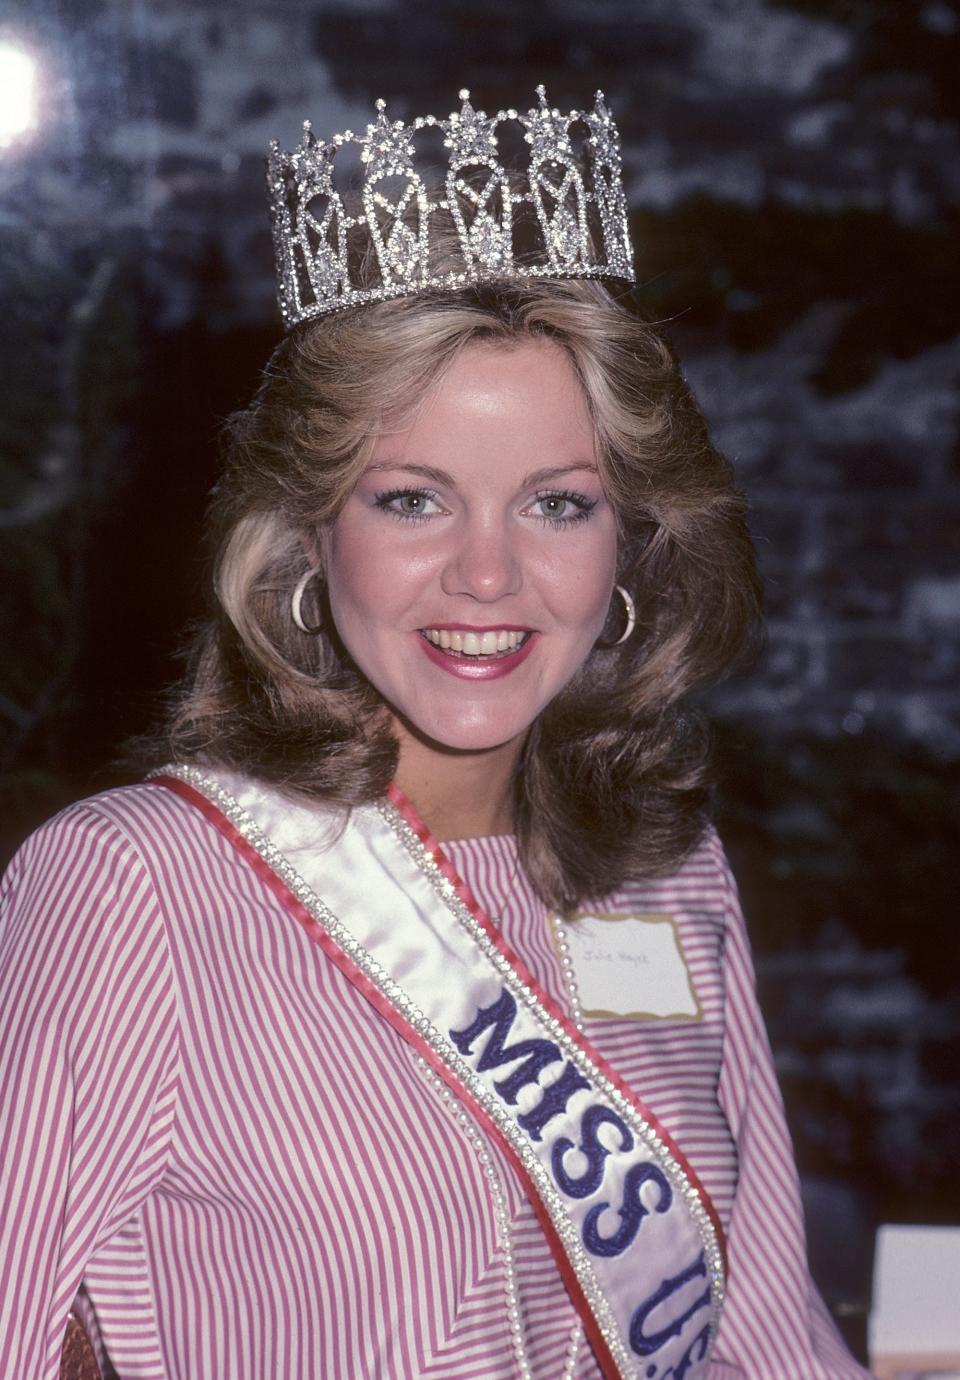 Miss USA 1983 Julie Hayek smiles while wearing a pageant and a tiara.